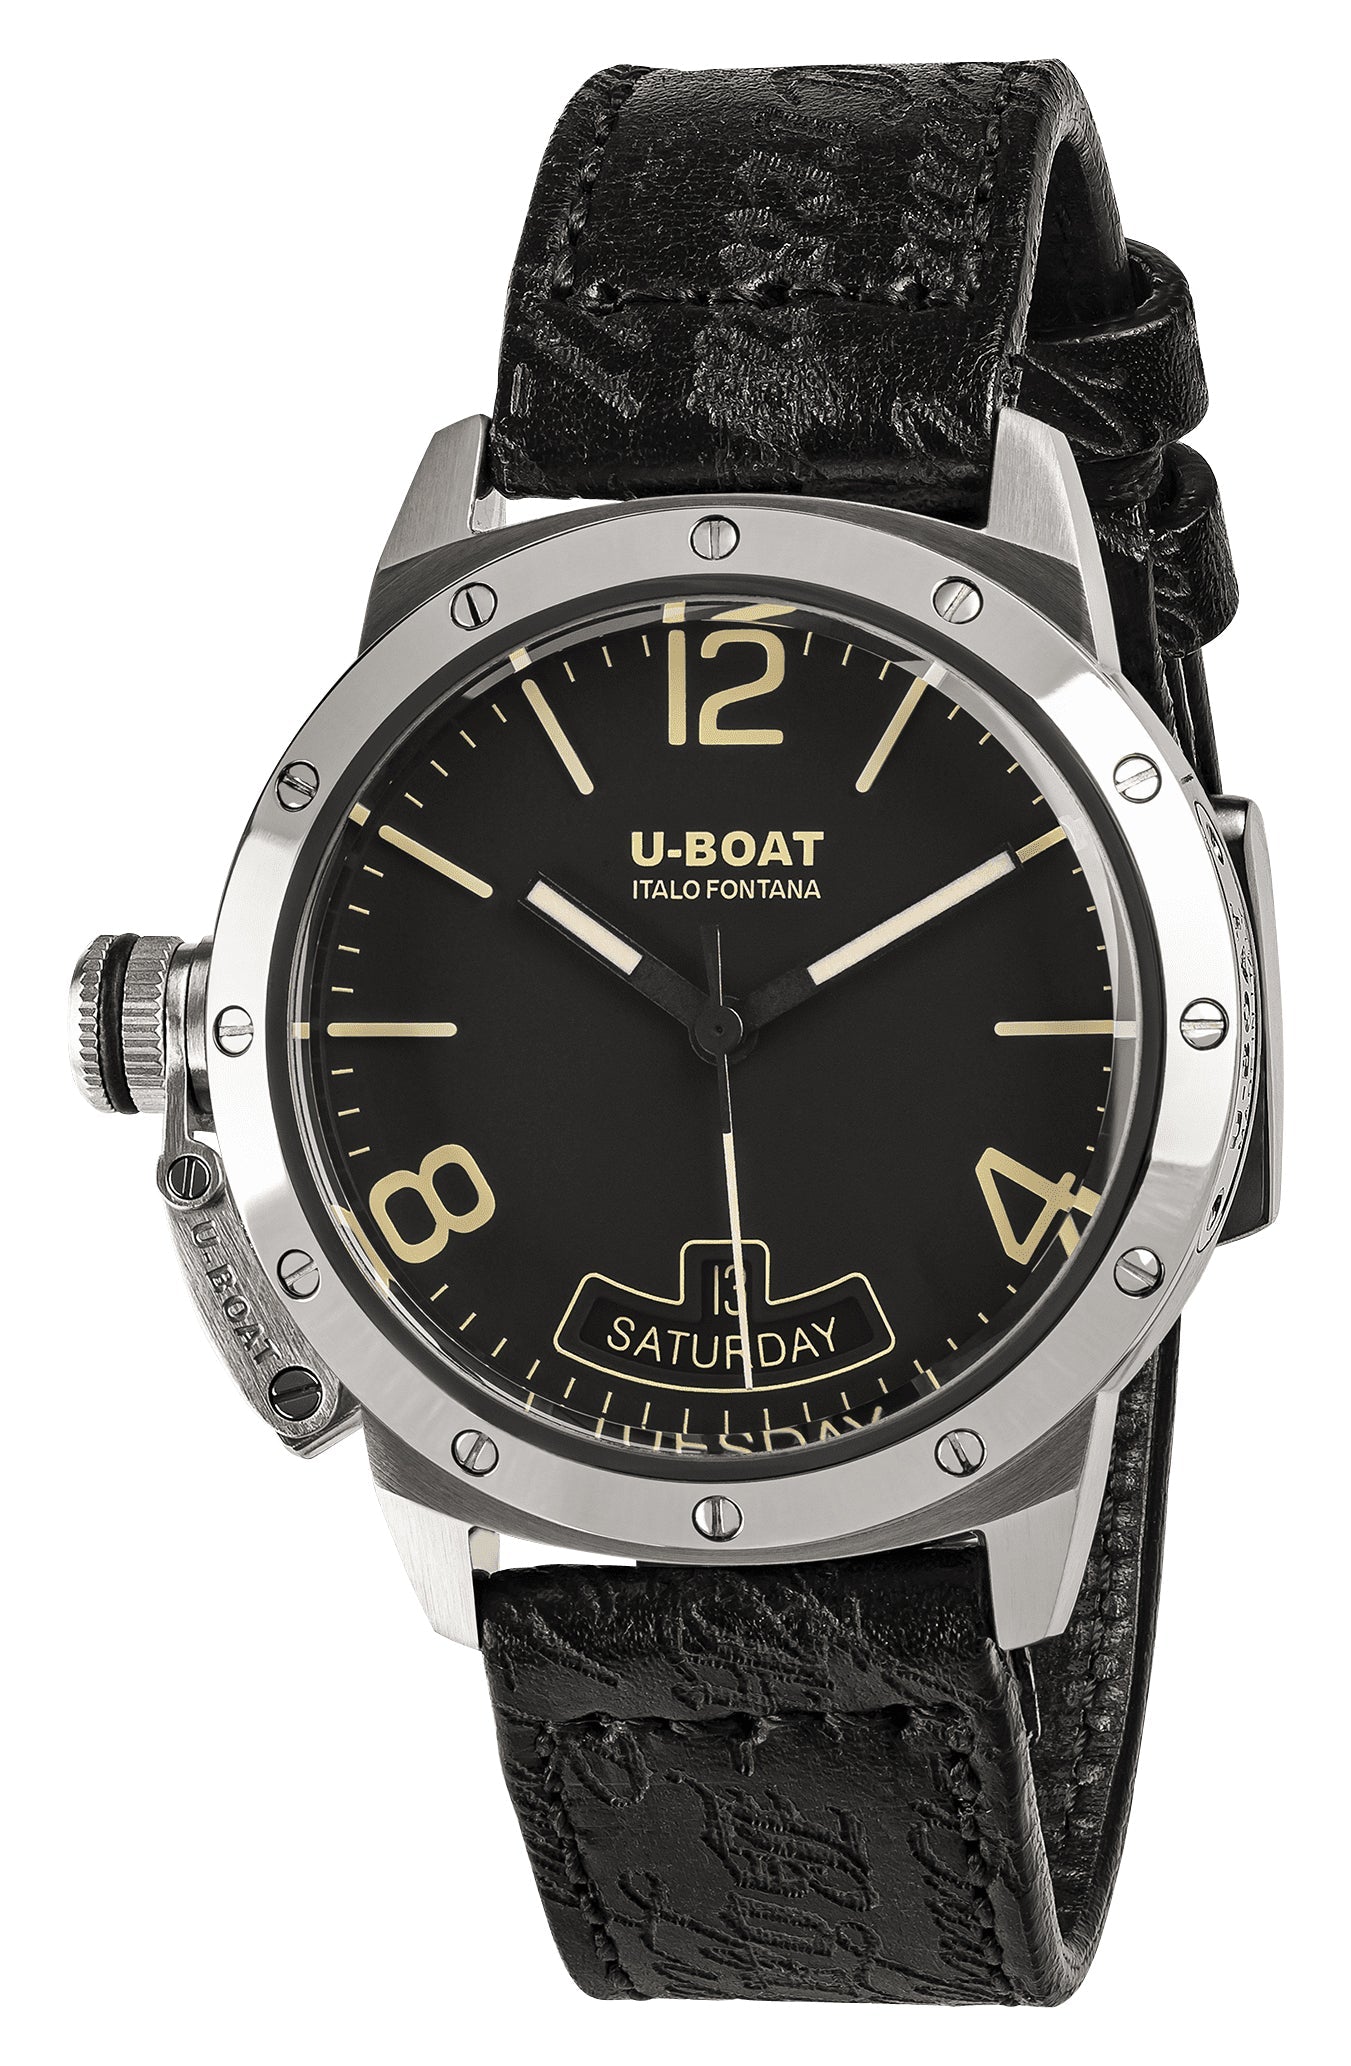 update alt-text with template Watches - Mens-U-Boat-8890-35 - 40 mm, 40 - 45 mm, black, Classico Vintage, date, day, leather, mens, menswatches, new arrivals, round, rpSKU_8527, rpSKU_8891, rpSKU_8893, rpSKU_9007, rpSKU_9015, stainless steel case, swiss automatic, U-Boat, watches-Watches & Beyond